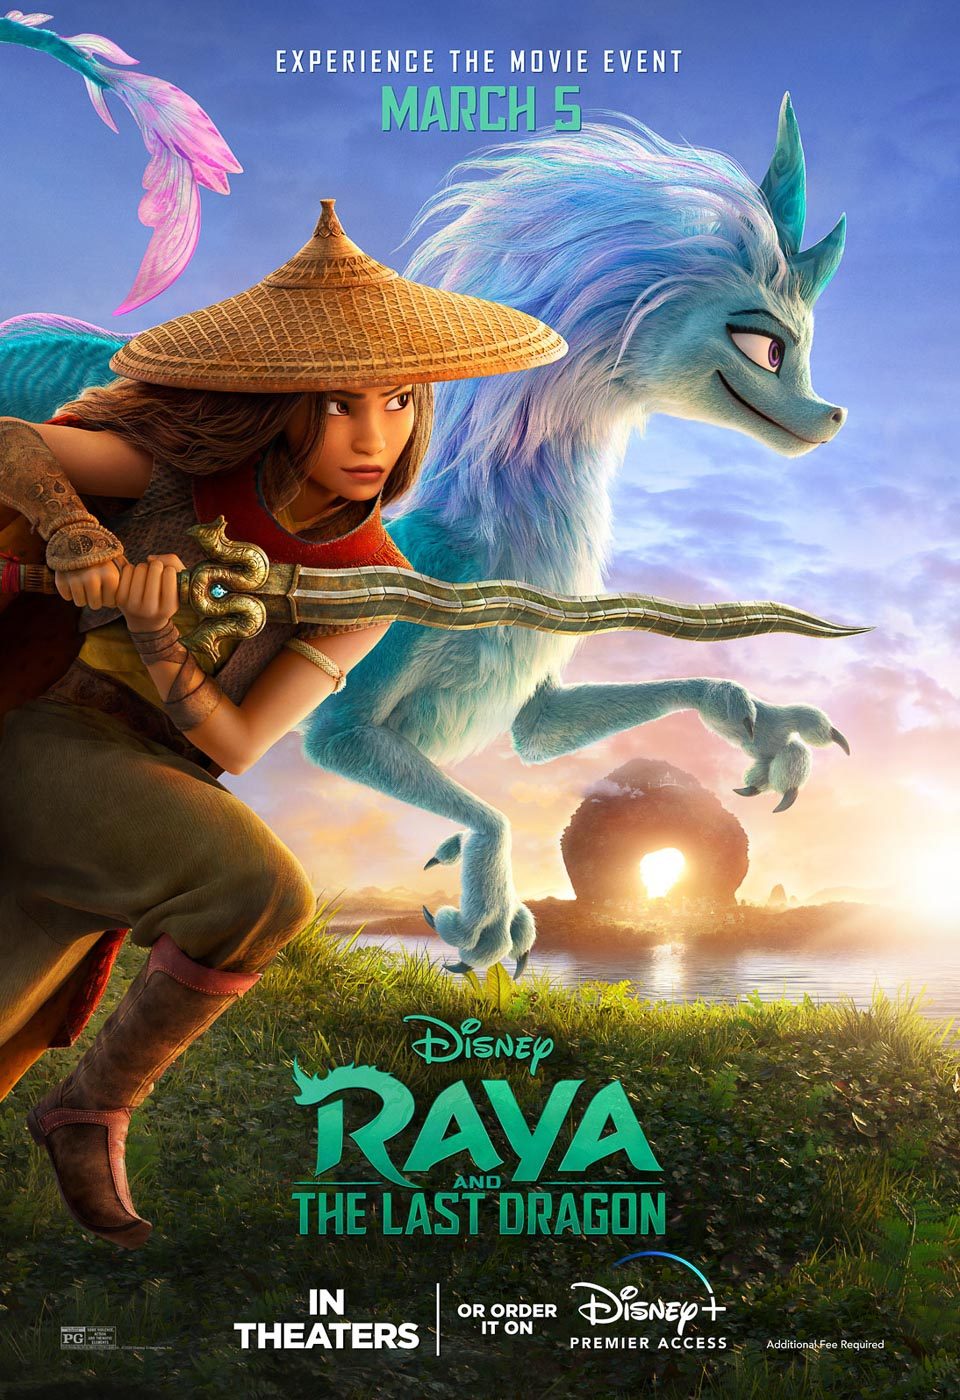 Disney’s ‘Raya and the Last Dragon’ takes audience on an Asian-inspired adventure